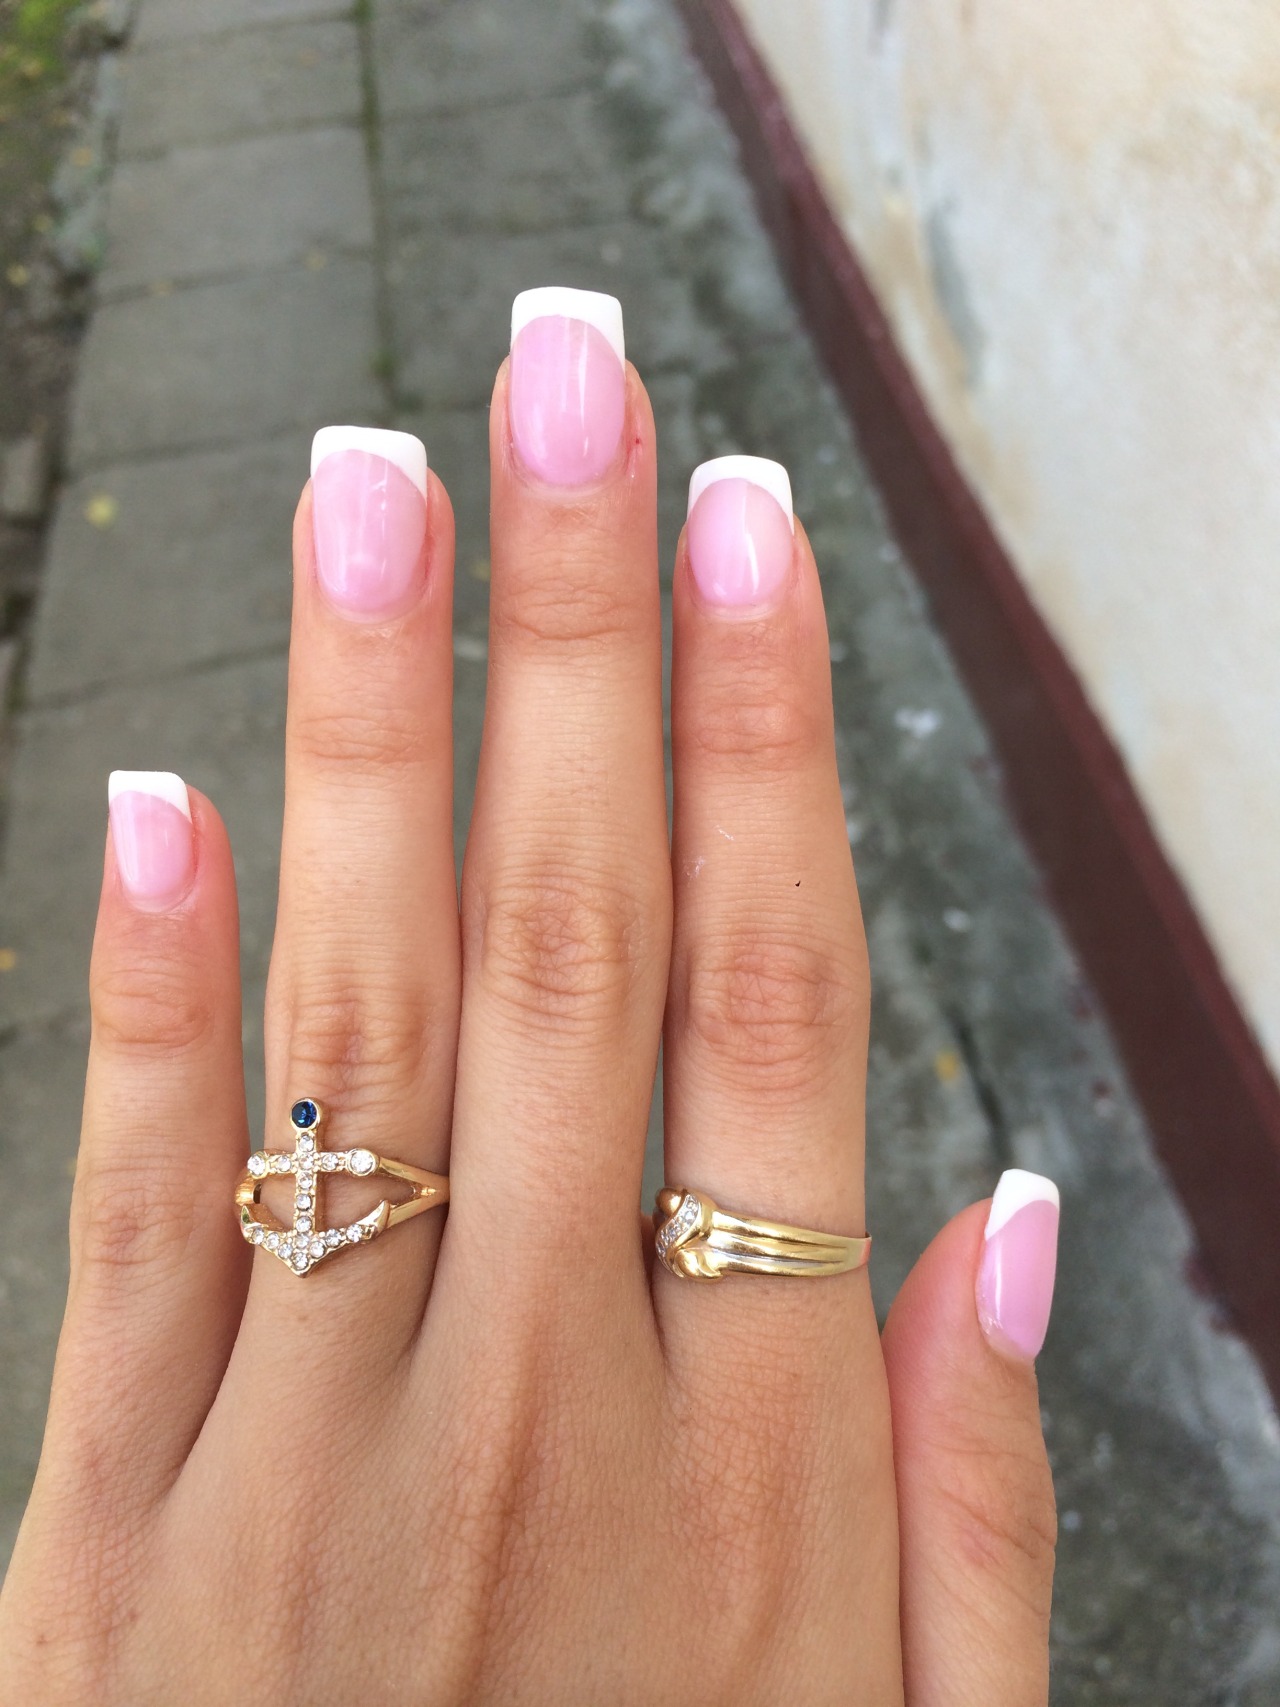 nailpornography:   Bacs to basics! 👠   submitted by serena09o